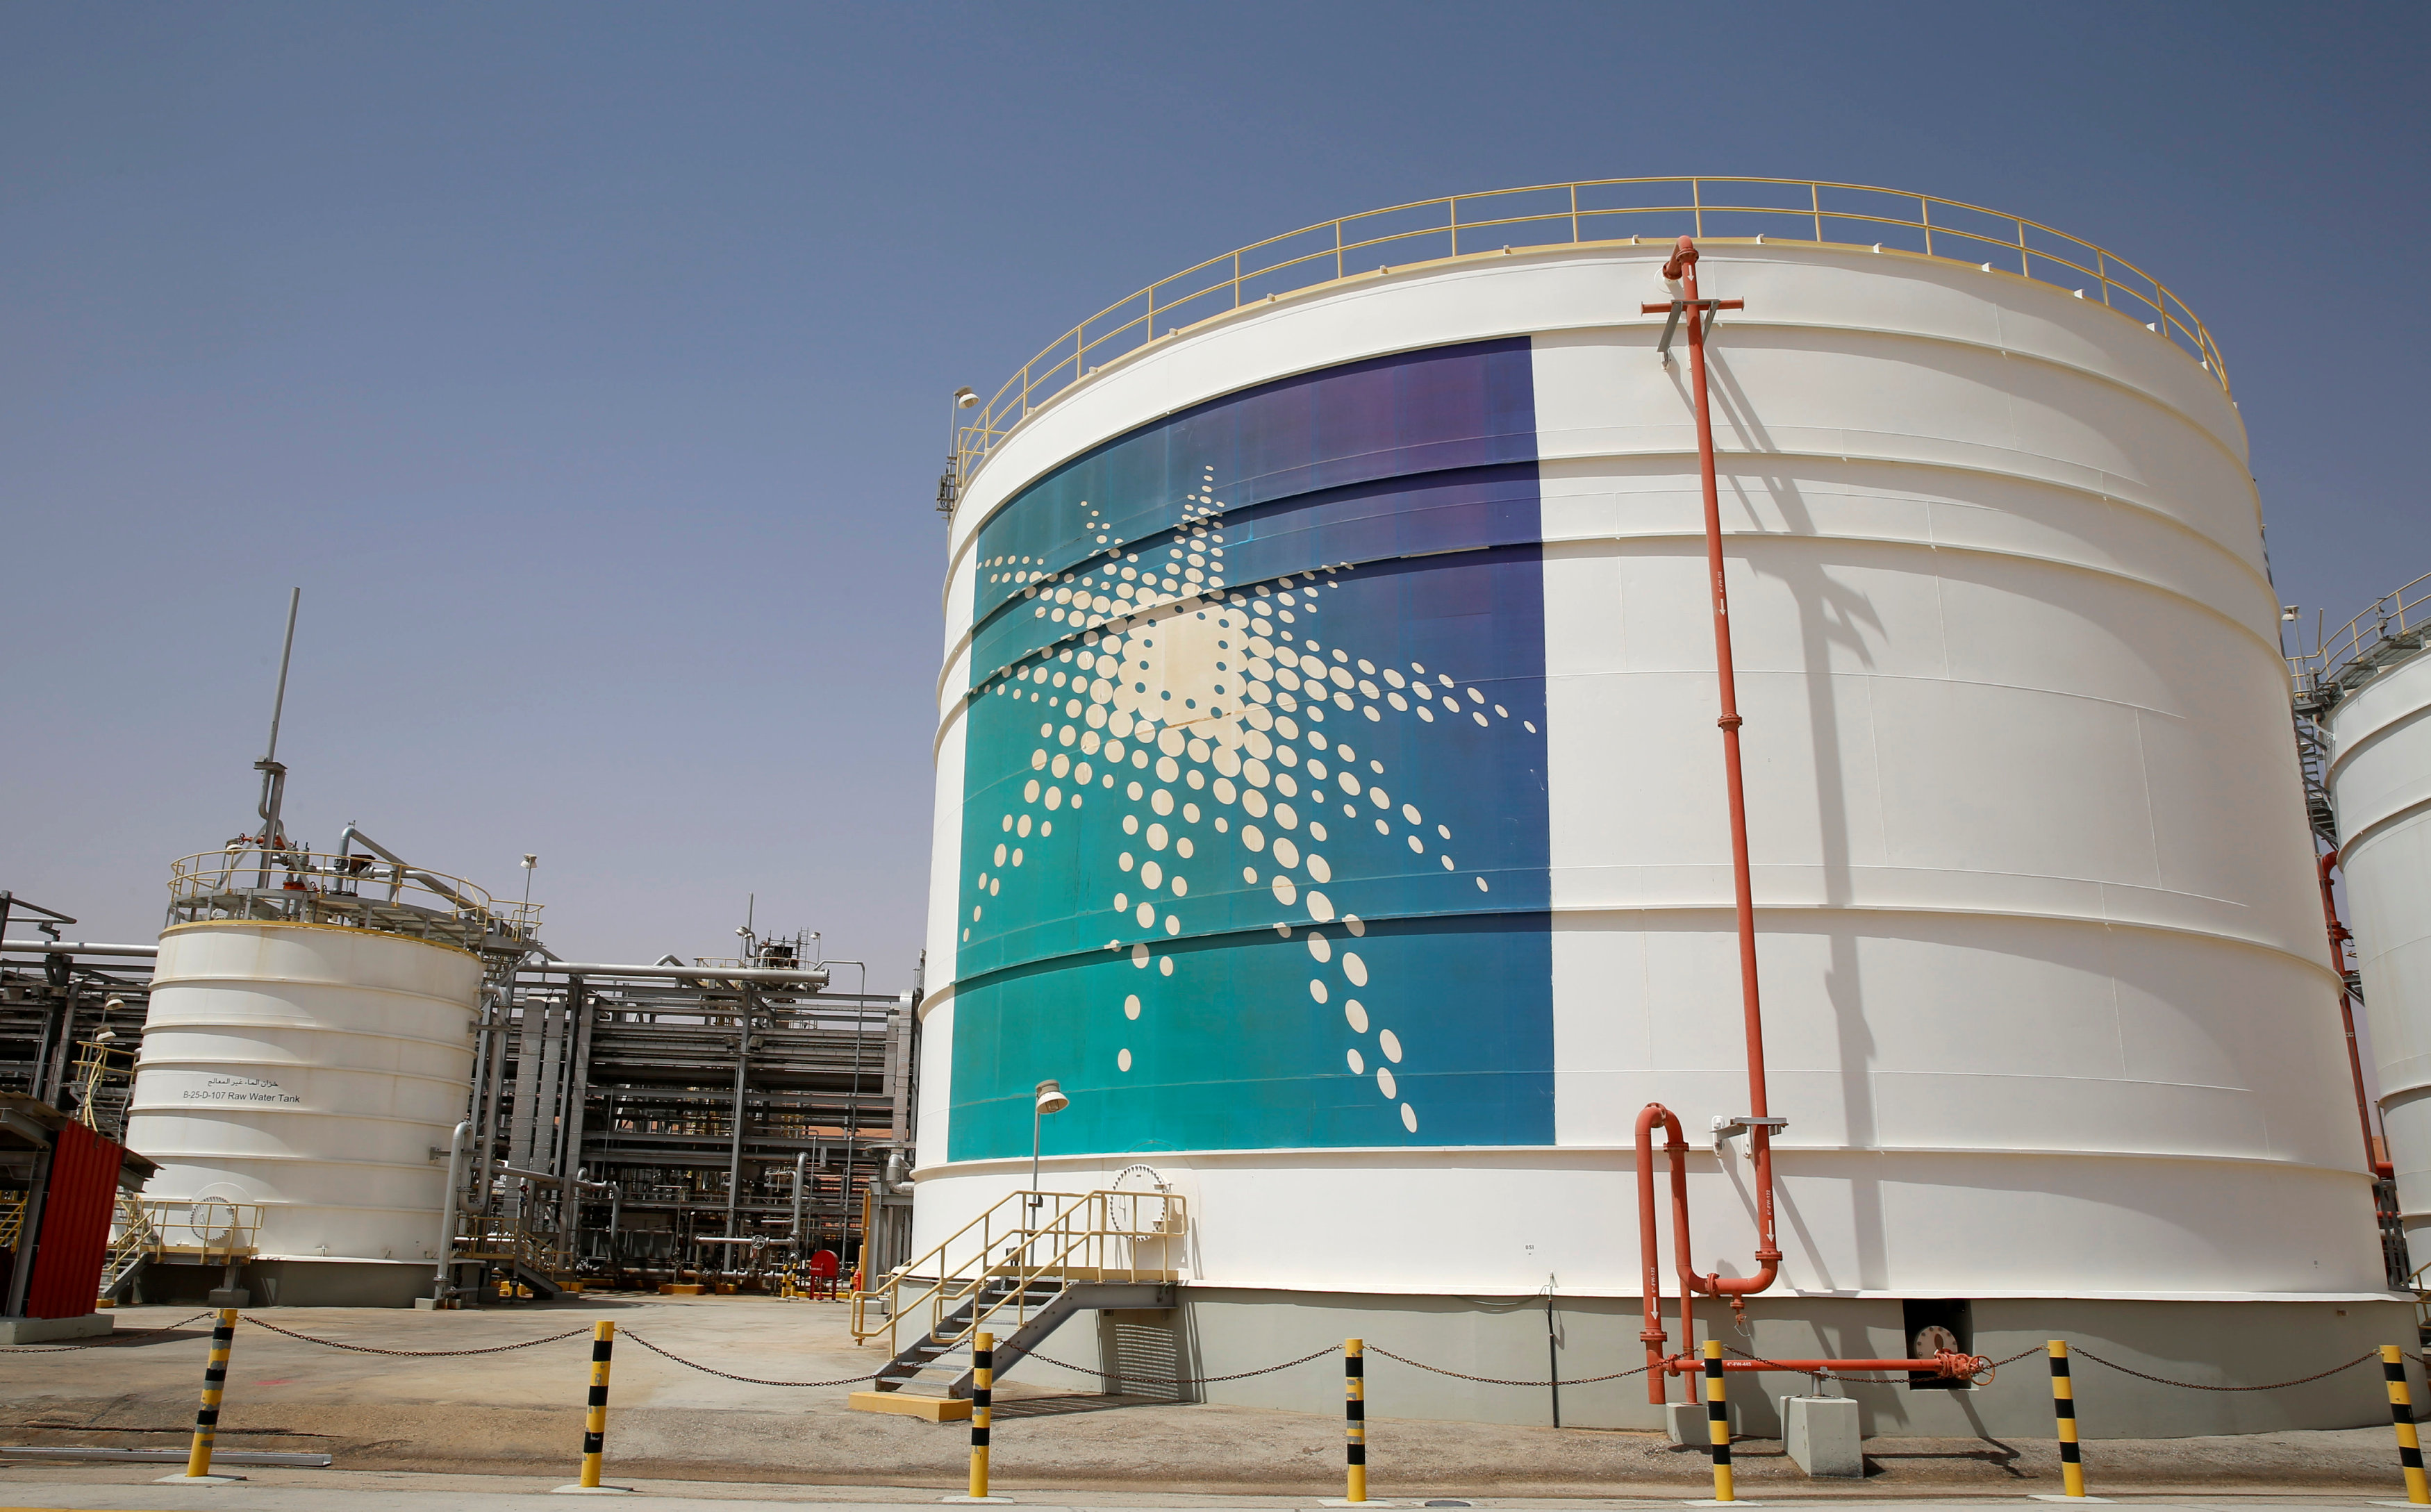 Saudi Aramco signs deal to make onshore oil rigs, equipment